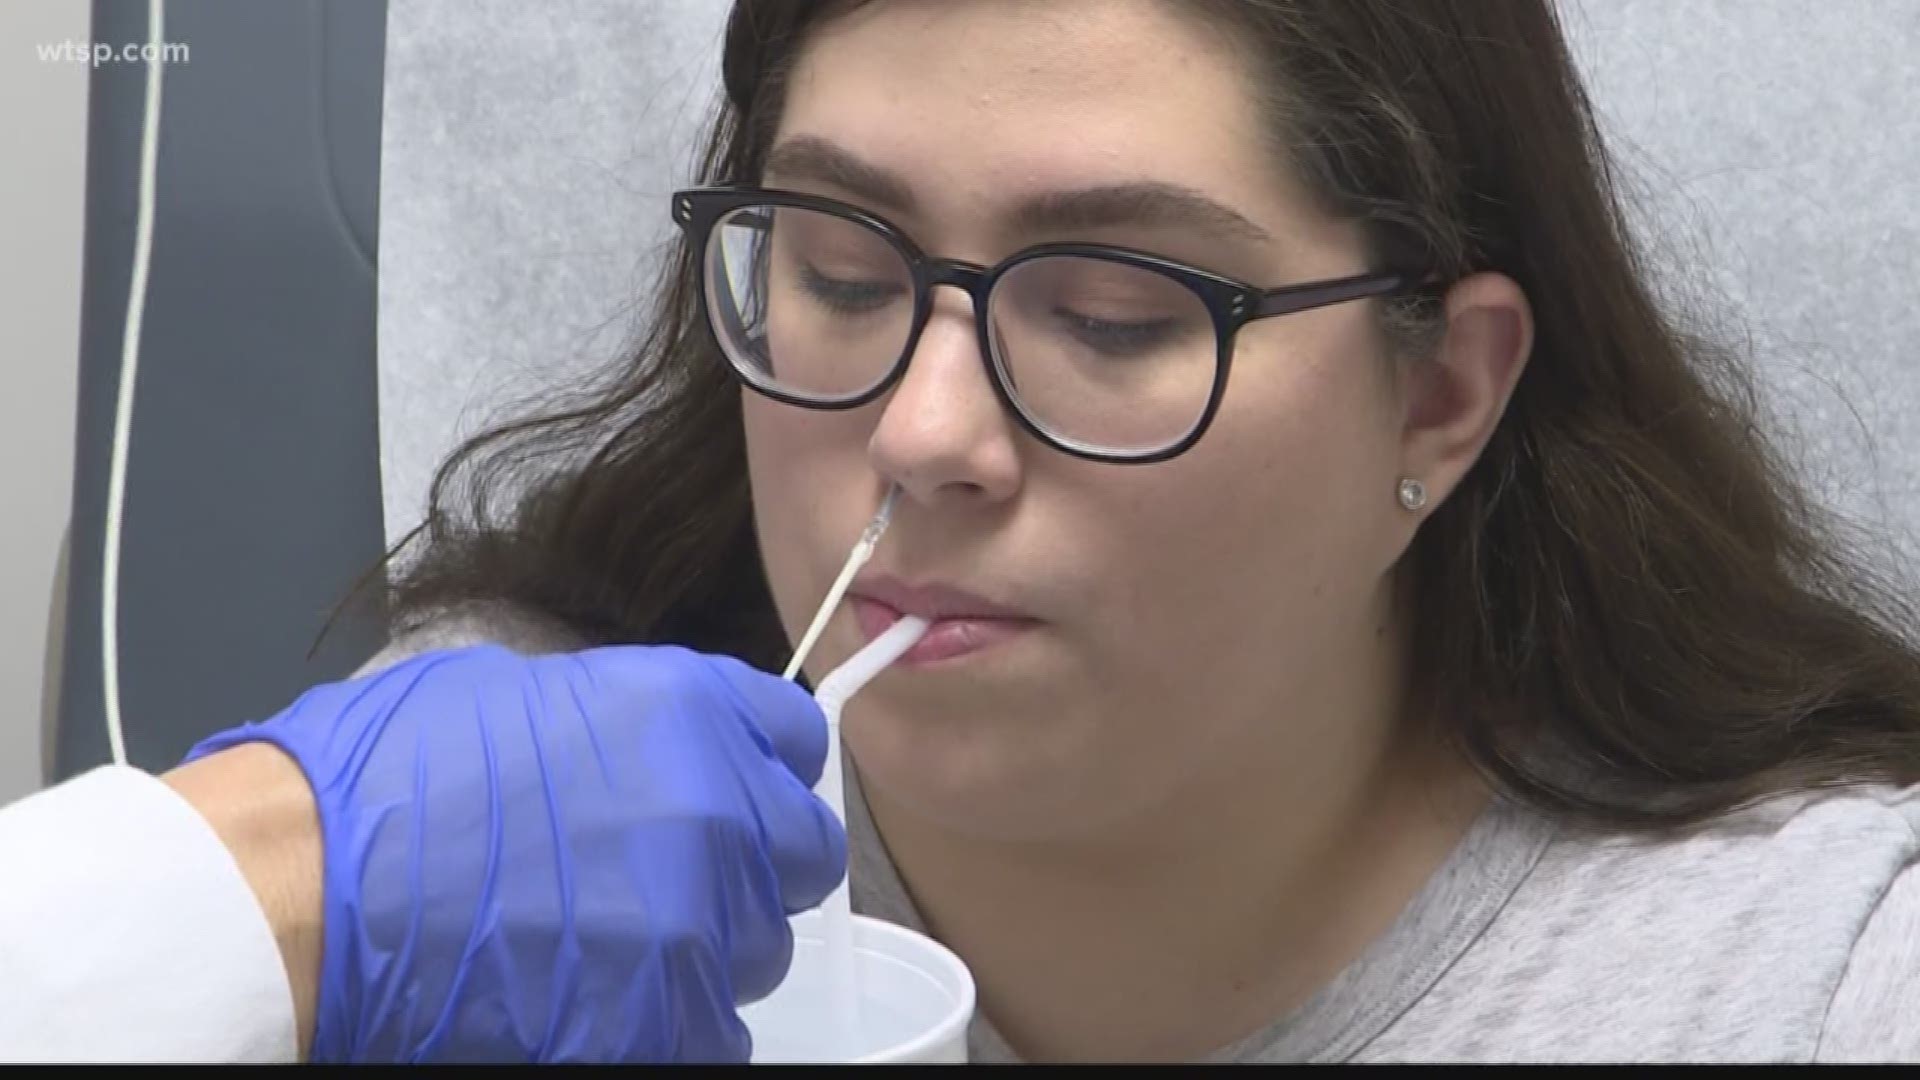 It's likely that you've seen someone with a feeding tube at one time or another.

The nasogastric feeding tube was created to deliver nutrition to sick and hospitalized people so they wouldn't starve.

For 22-year-old Gabriella Calabresi, it served a totally different purpose.

She is a patient at a Miami clinic and is using an "NG" tube with the hope of losing weight.